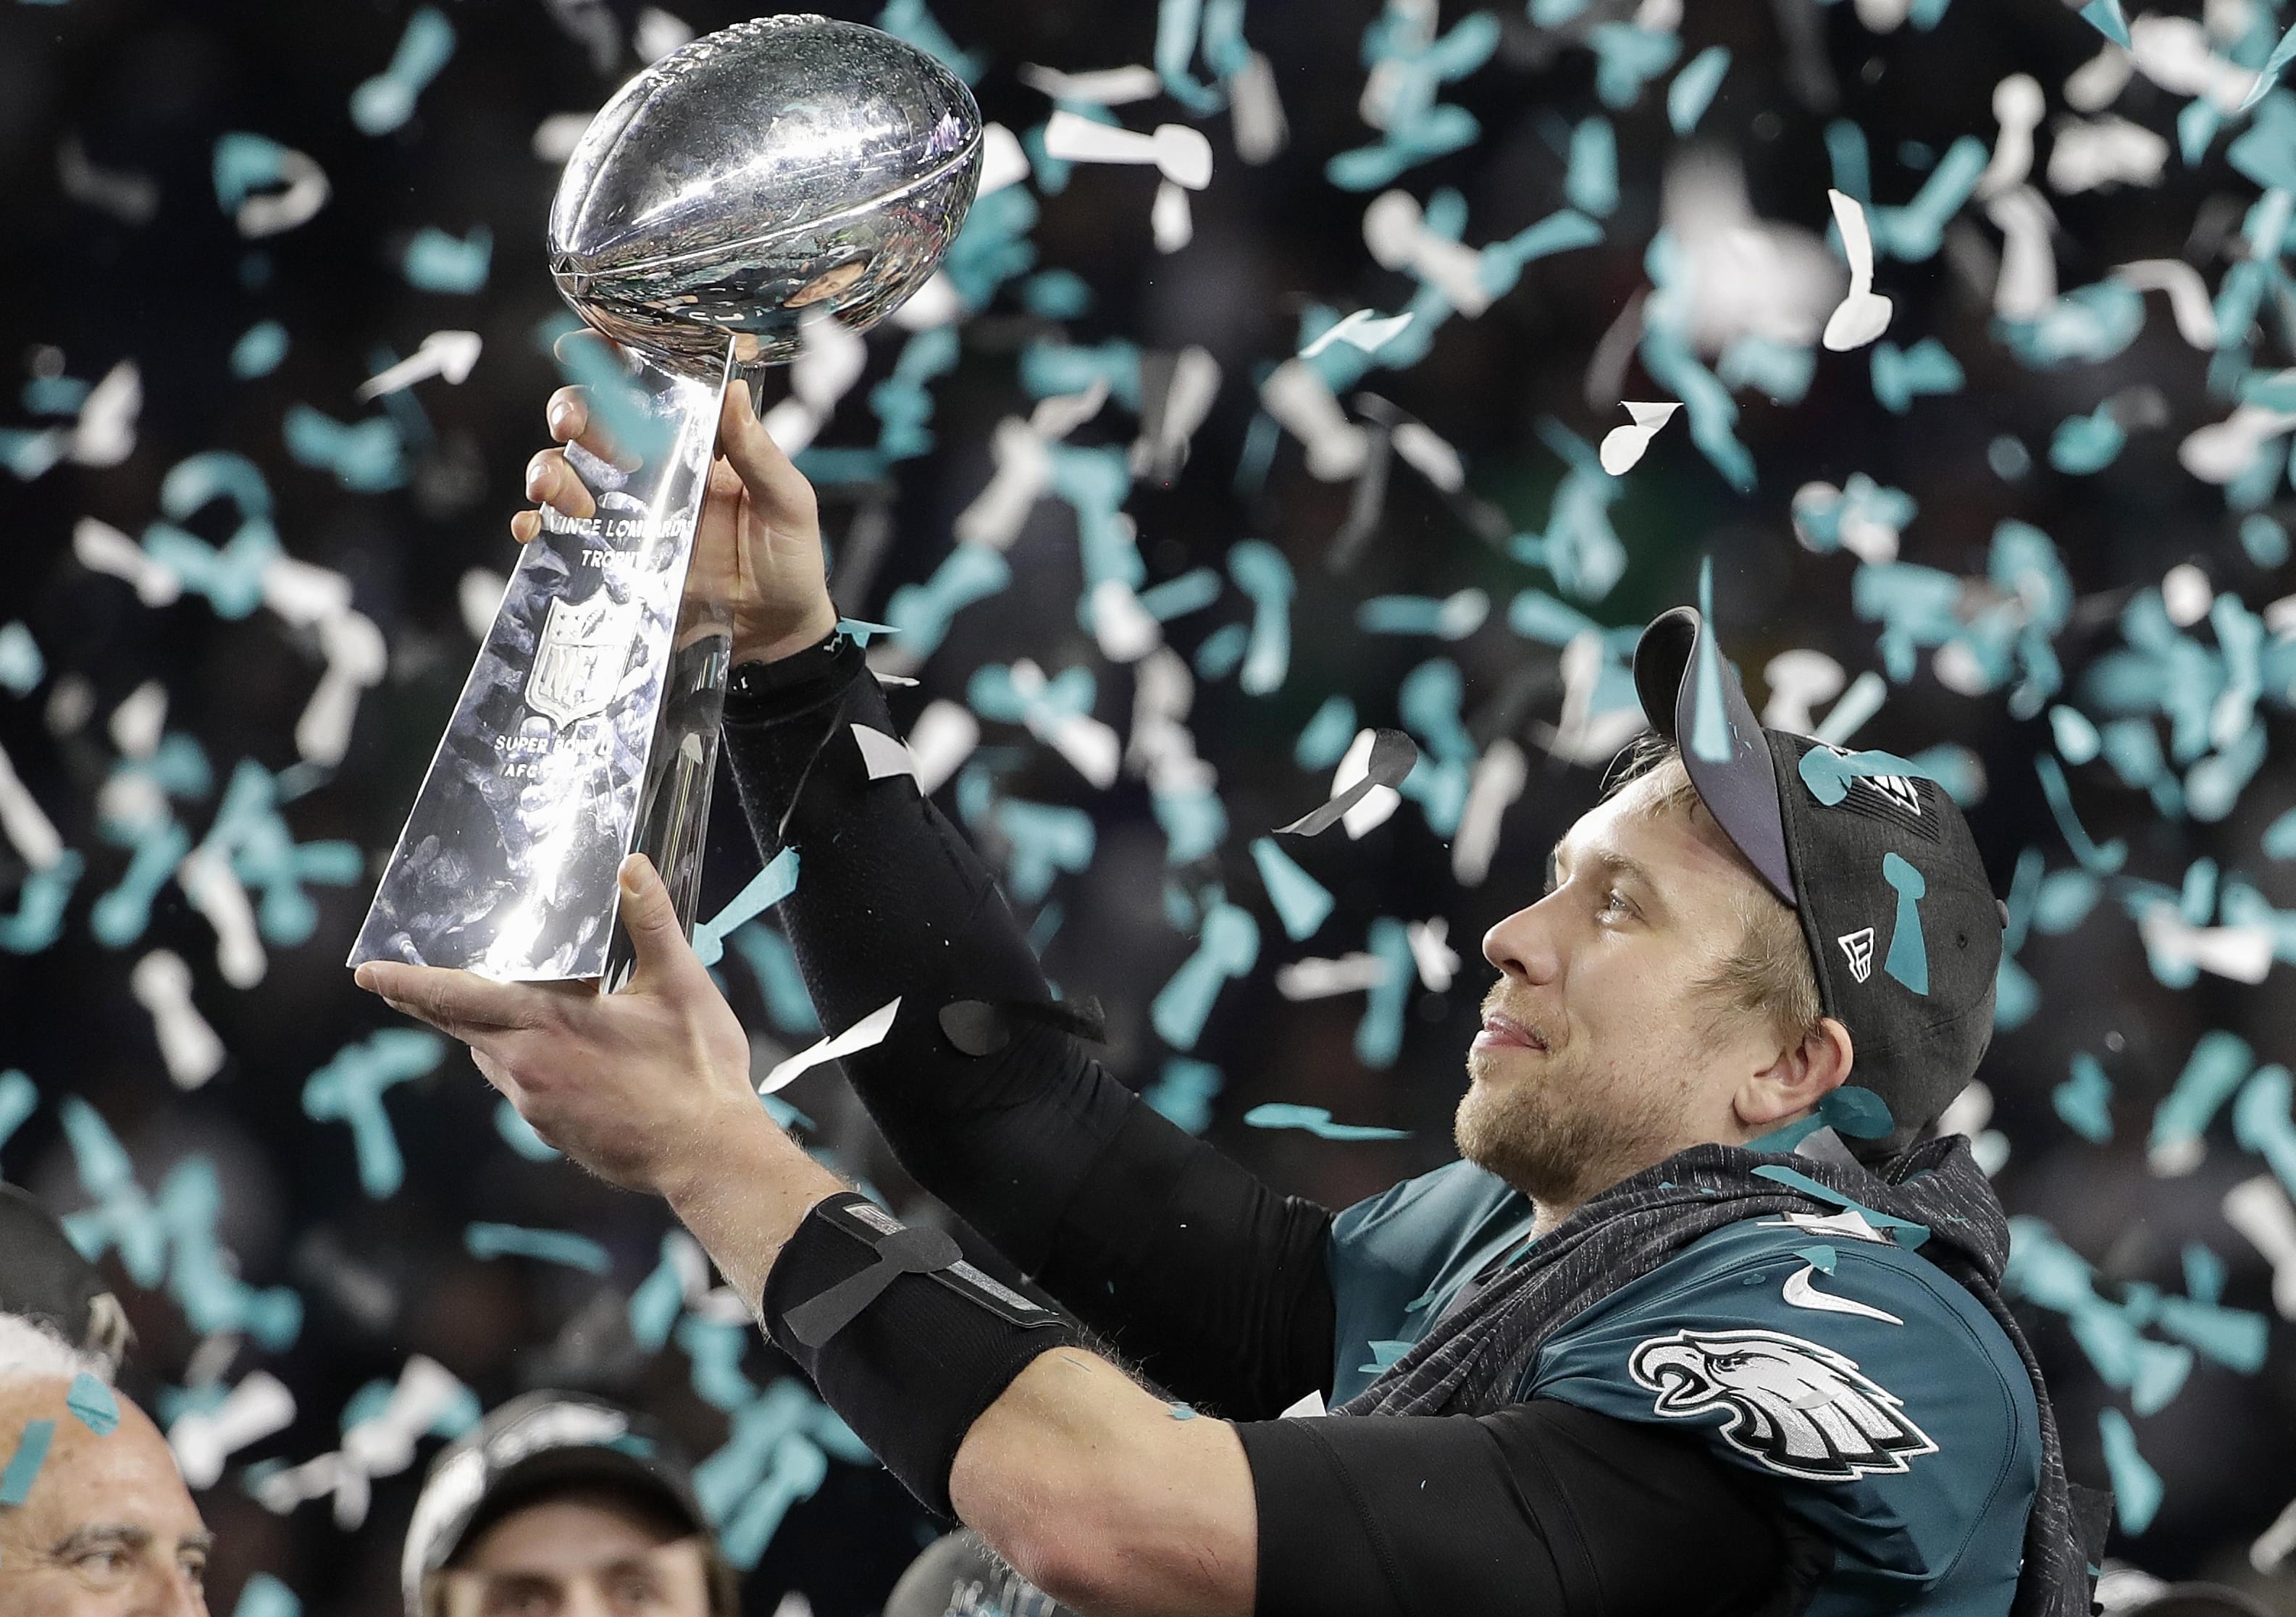 Philadelphia Eagles' Nick Foles holds up the Vince Lombardi Trophy after his team's Super Bowl victory.